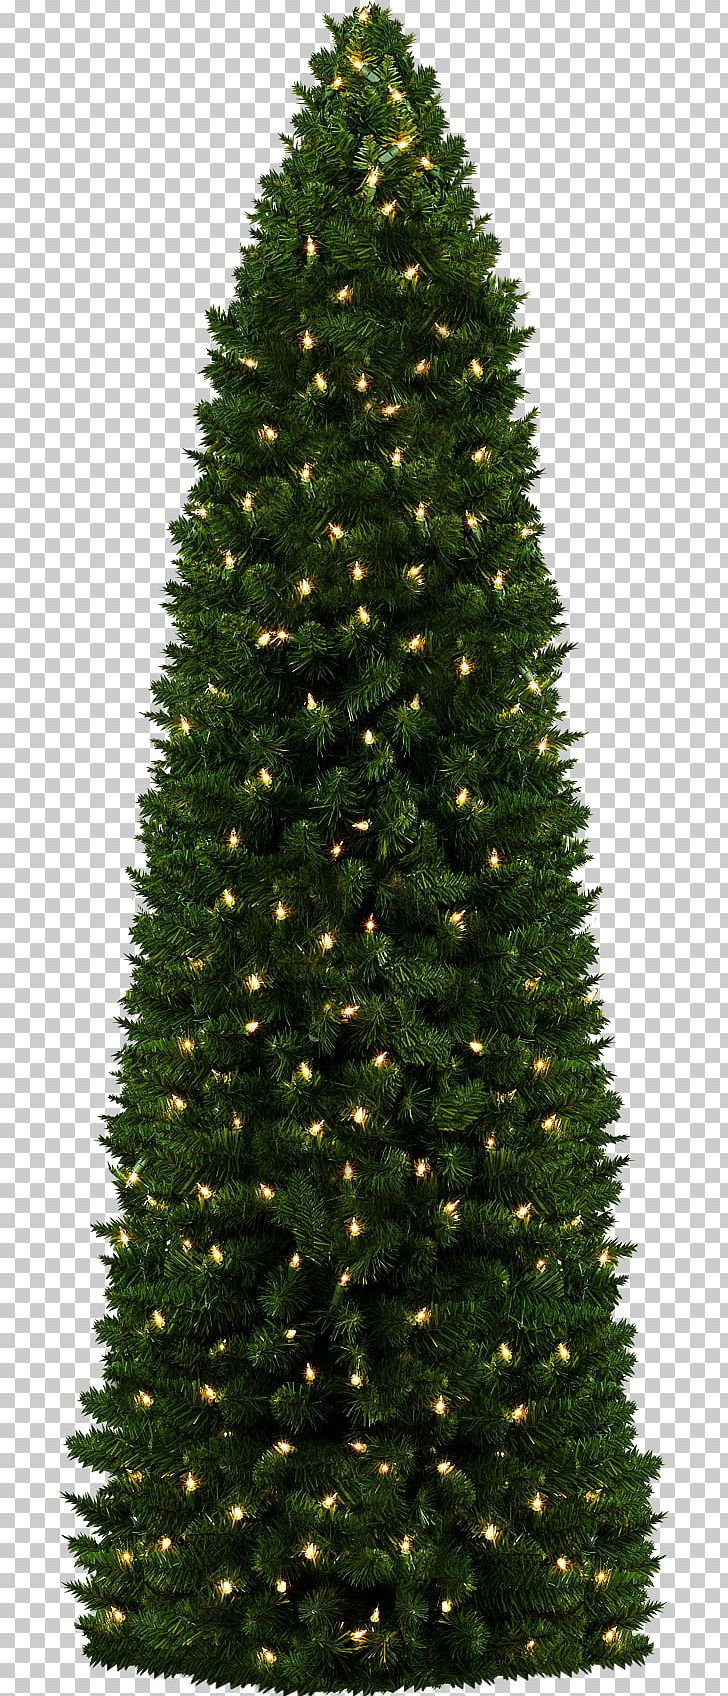 Christmas Tree PNG, Clipart, Biome, Christmas, Christmas Decoration, Christmas Gift, Christmas Ornament Free PNG Download